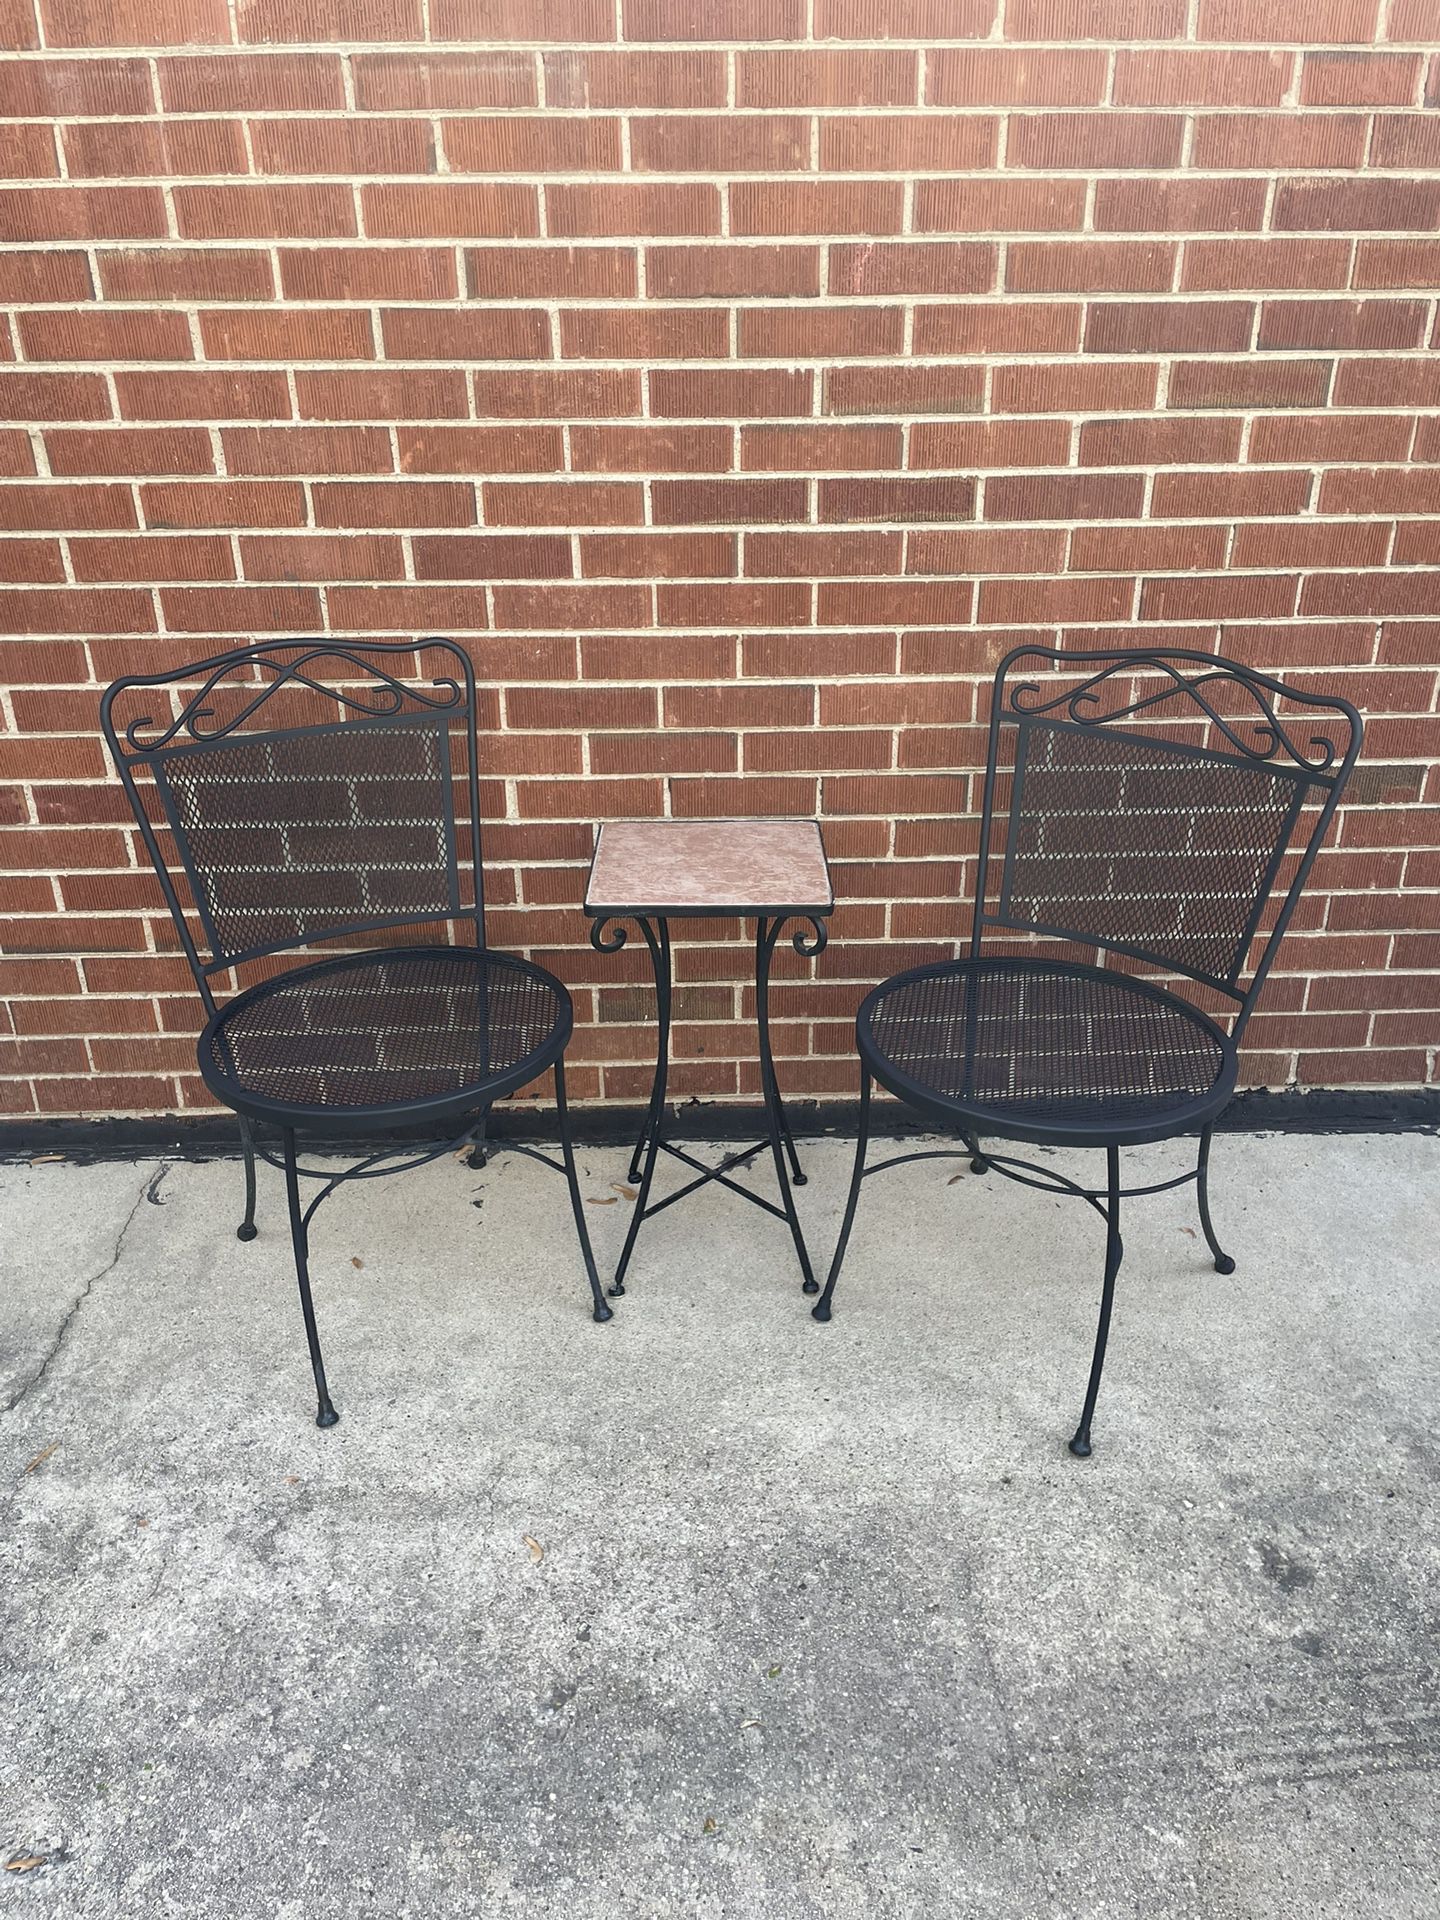 Patio Bistro Set 2 Wrought Iron Chairs Table Marble Top